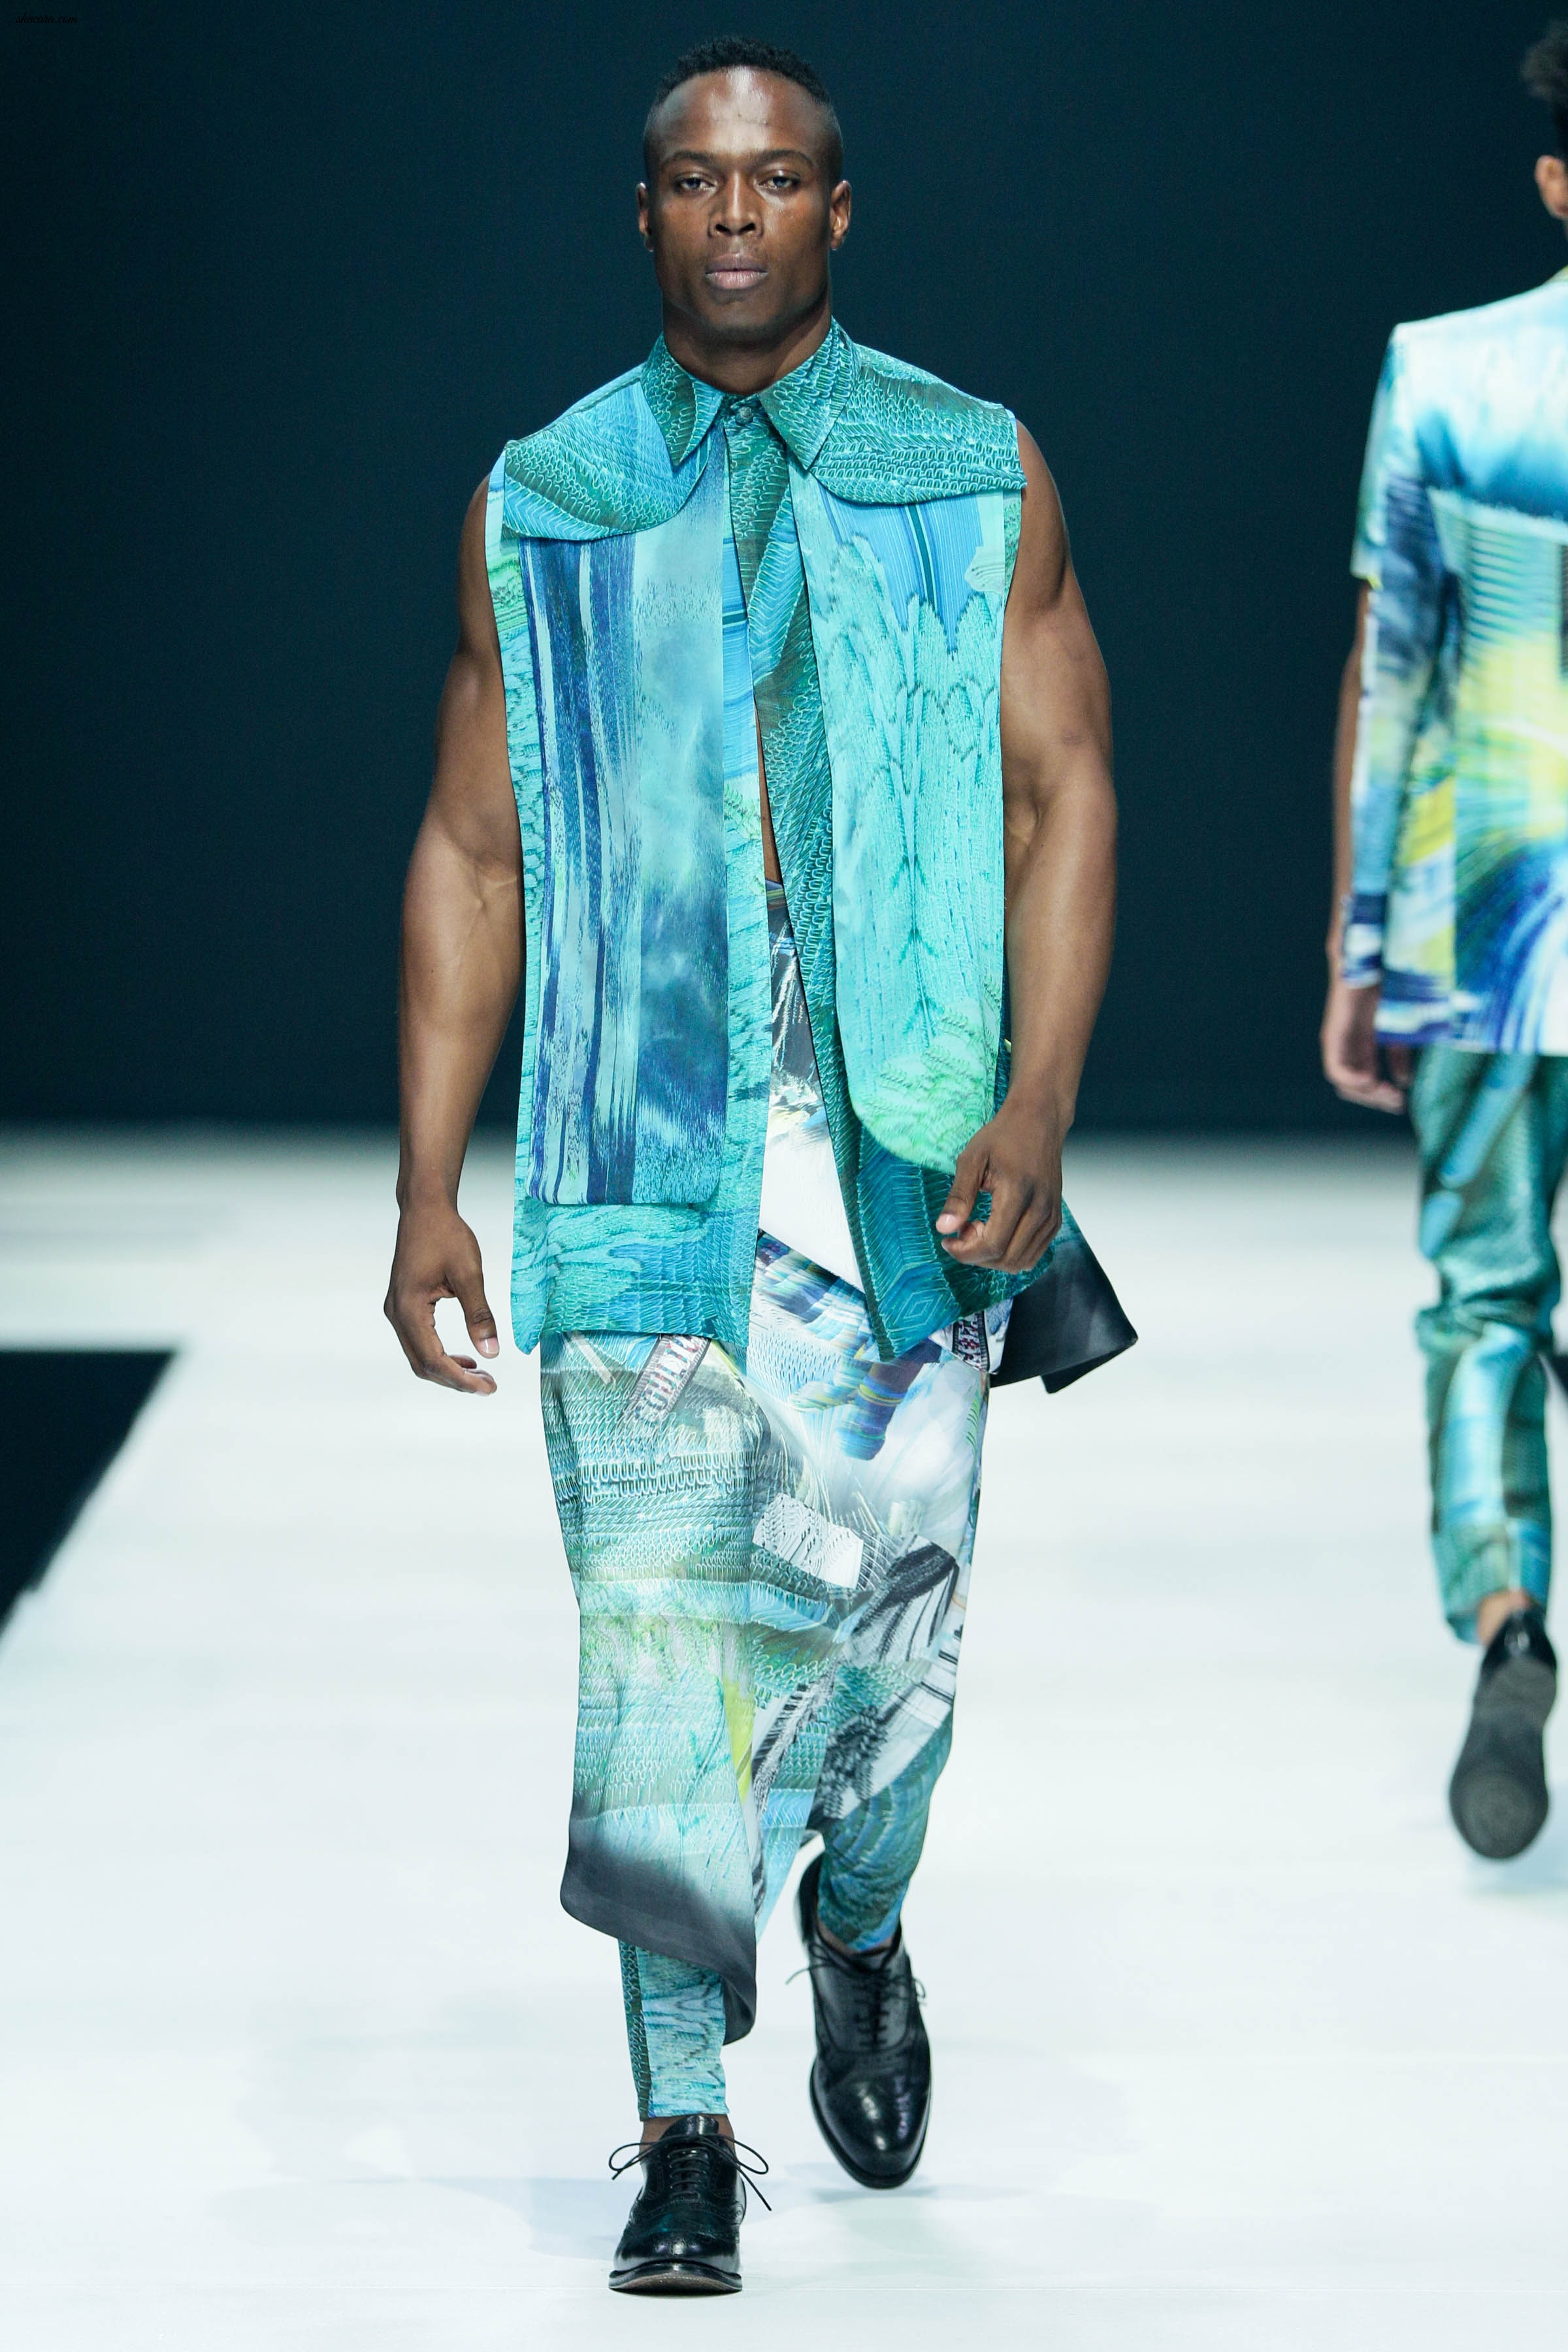 Runway To Real Life! Flavour Sports David Tlale SS20 For His #BAFEST 2019 Performance